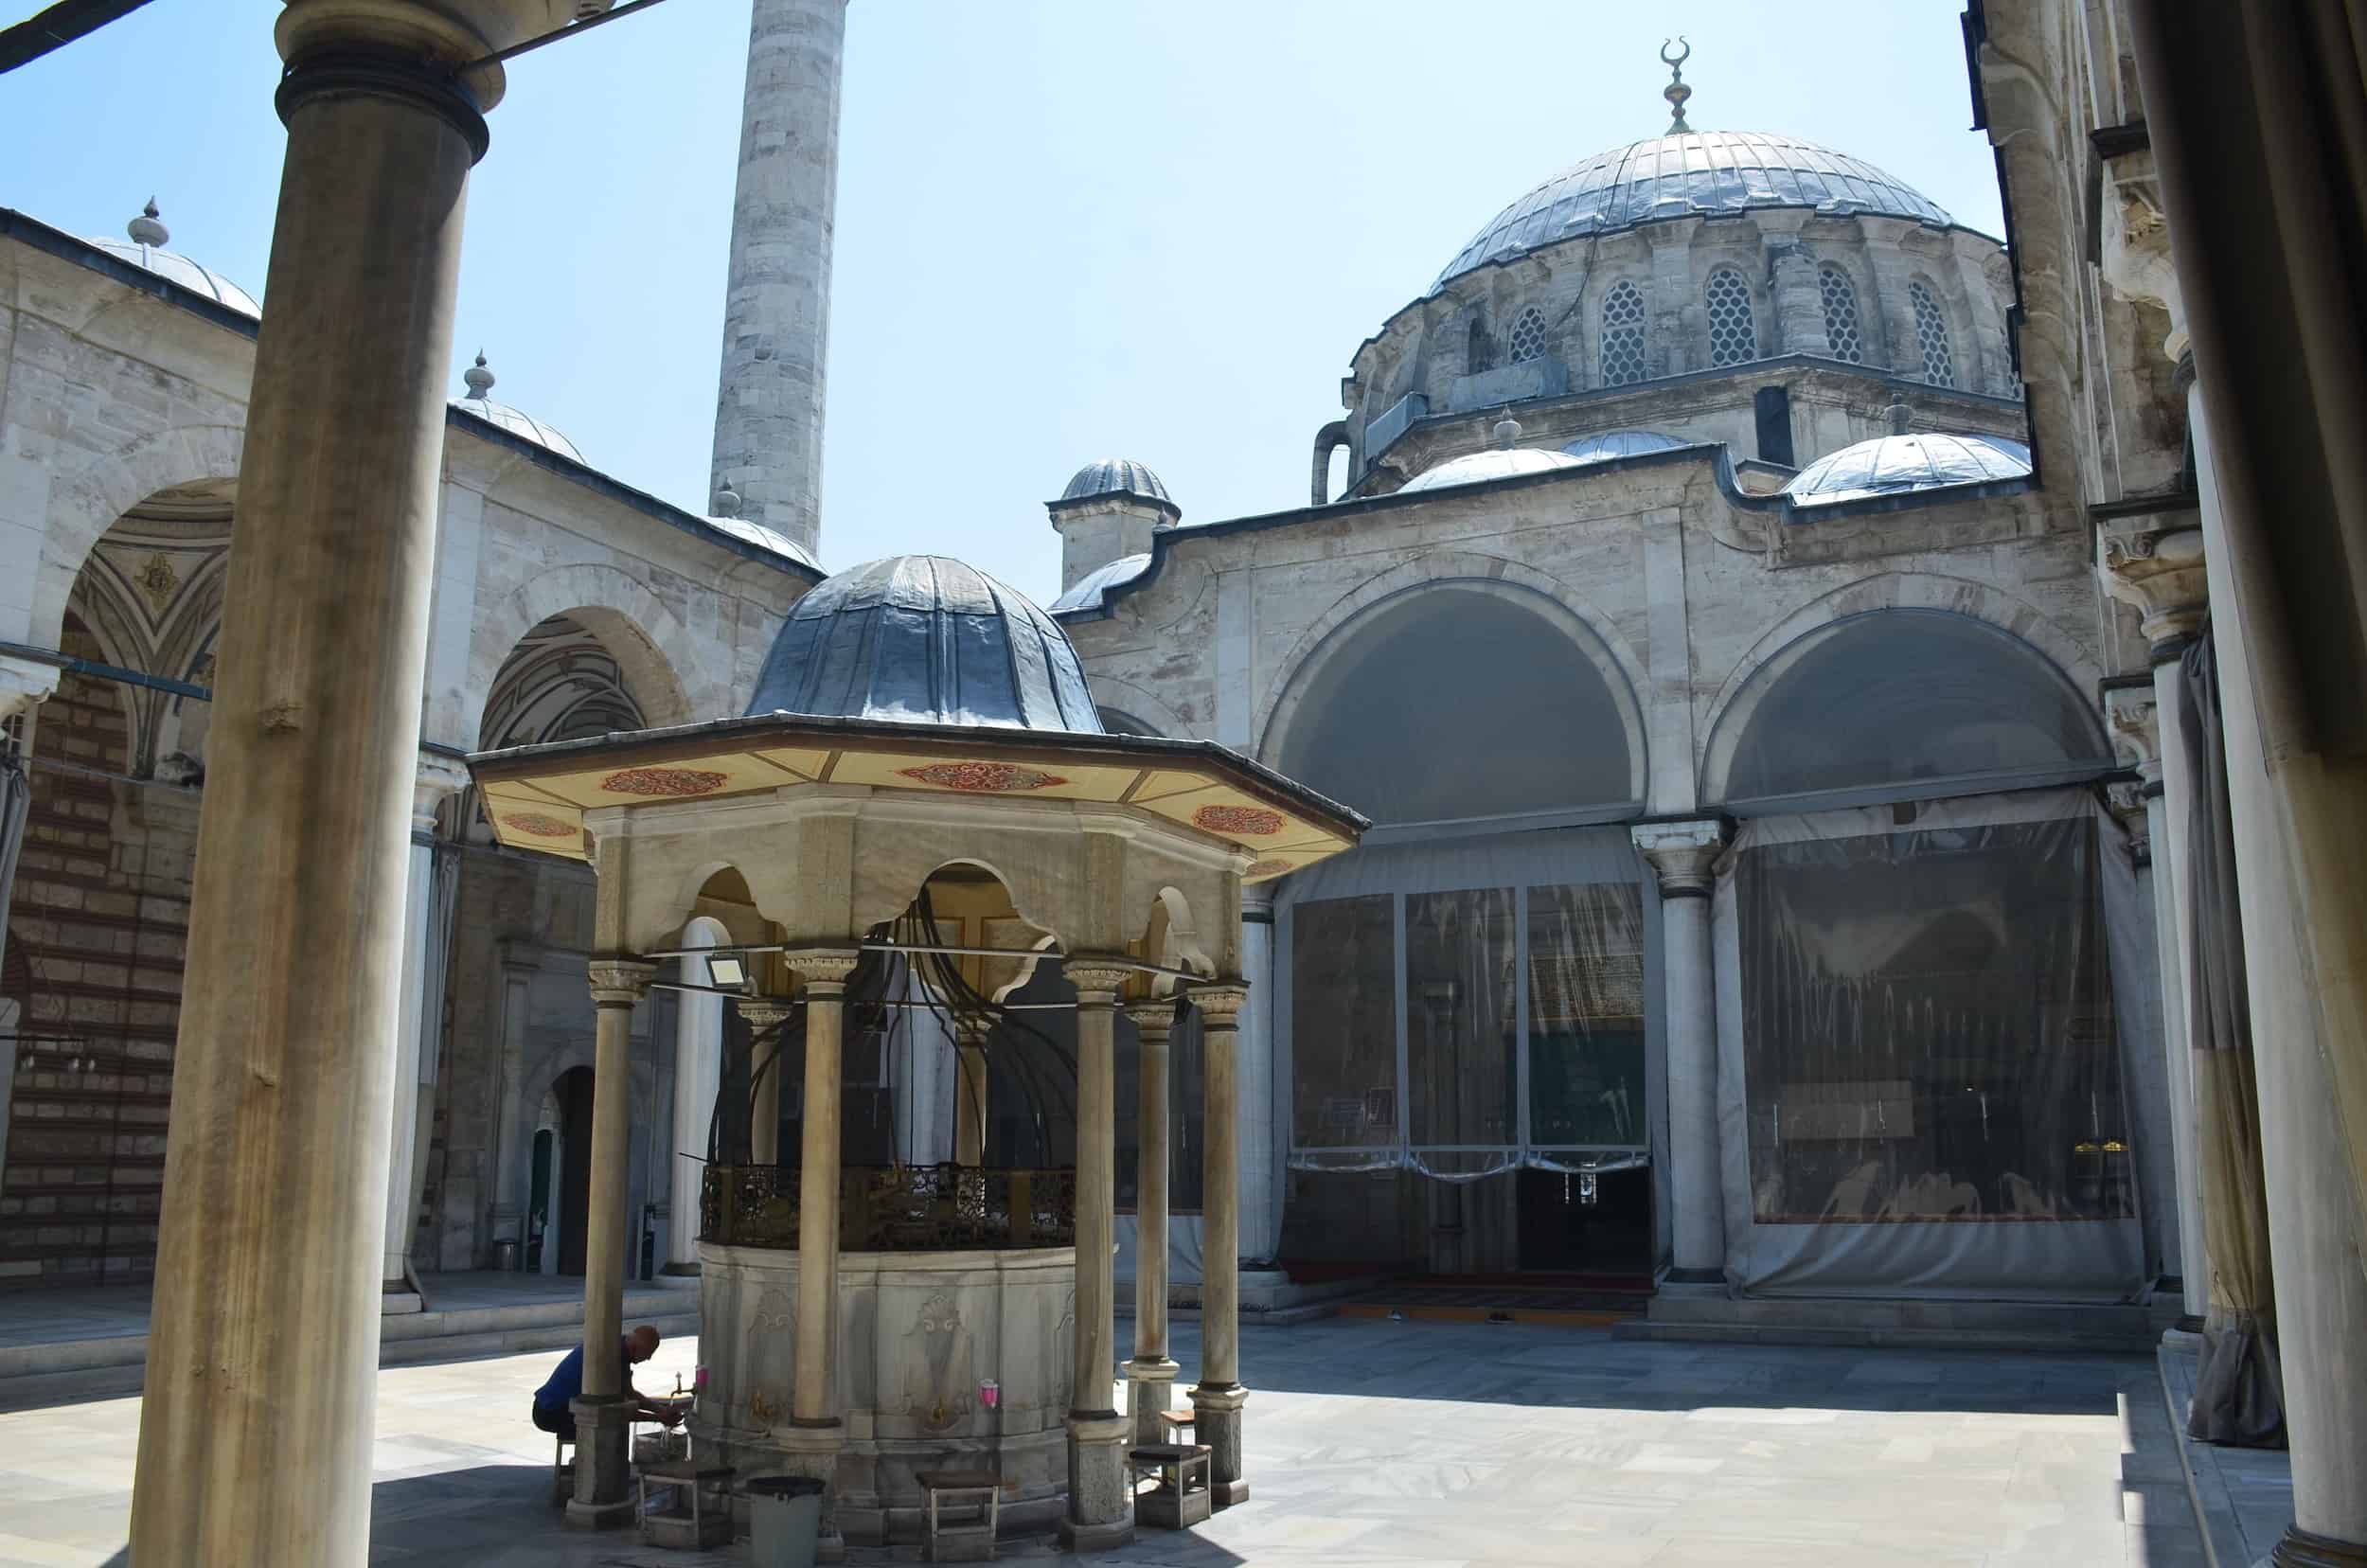 Courtyard of the Laleli Mosque in Laleli, Istanbul, Turkey